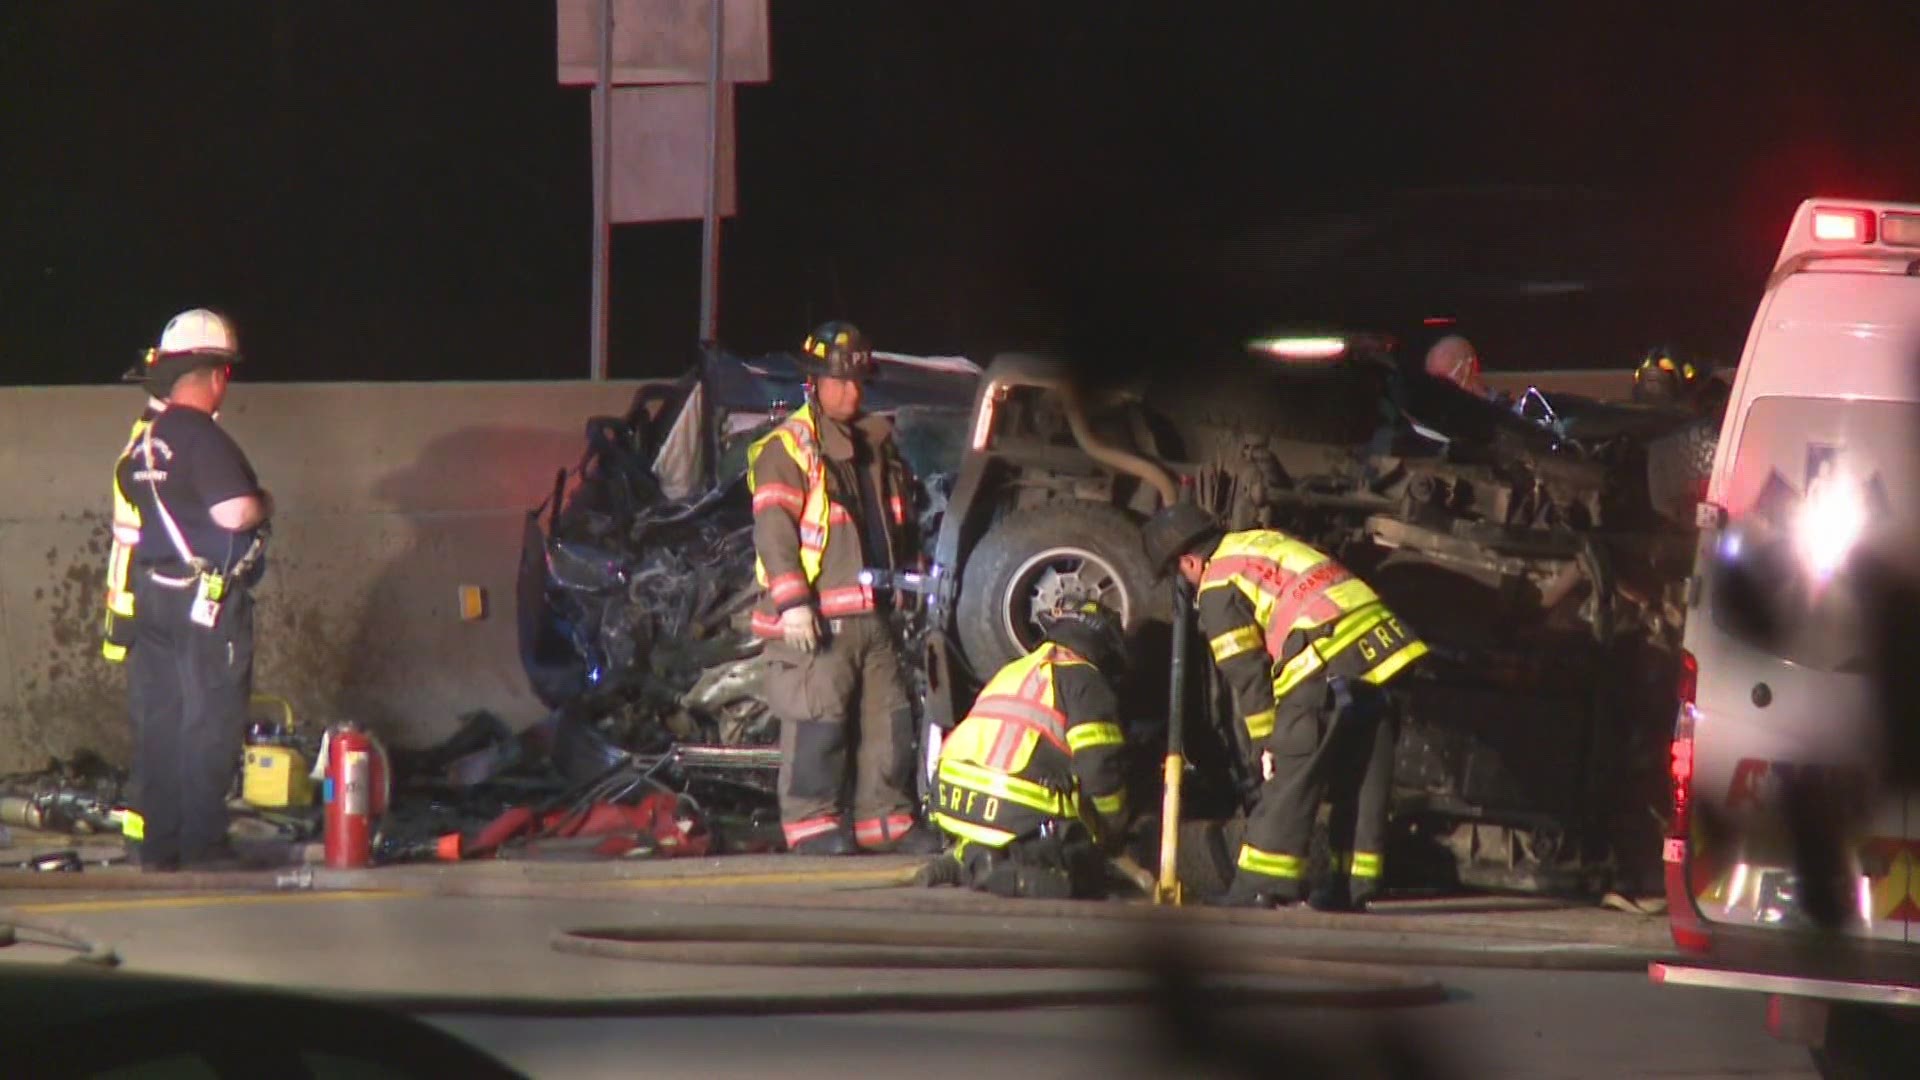 One person is dead and another is seriously injured after a wrong-way crash on southbound US-131 in Grand Rapids Friday, police say.